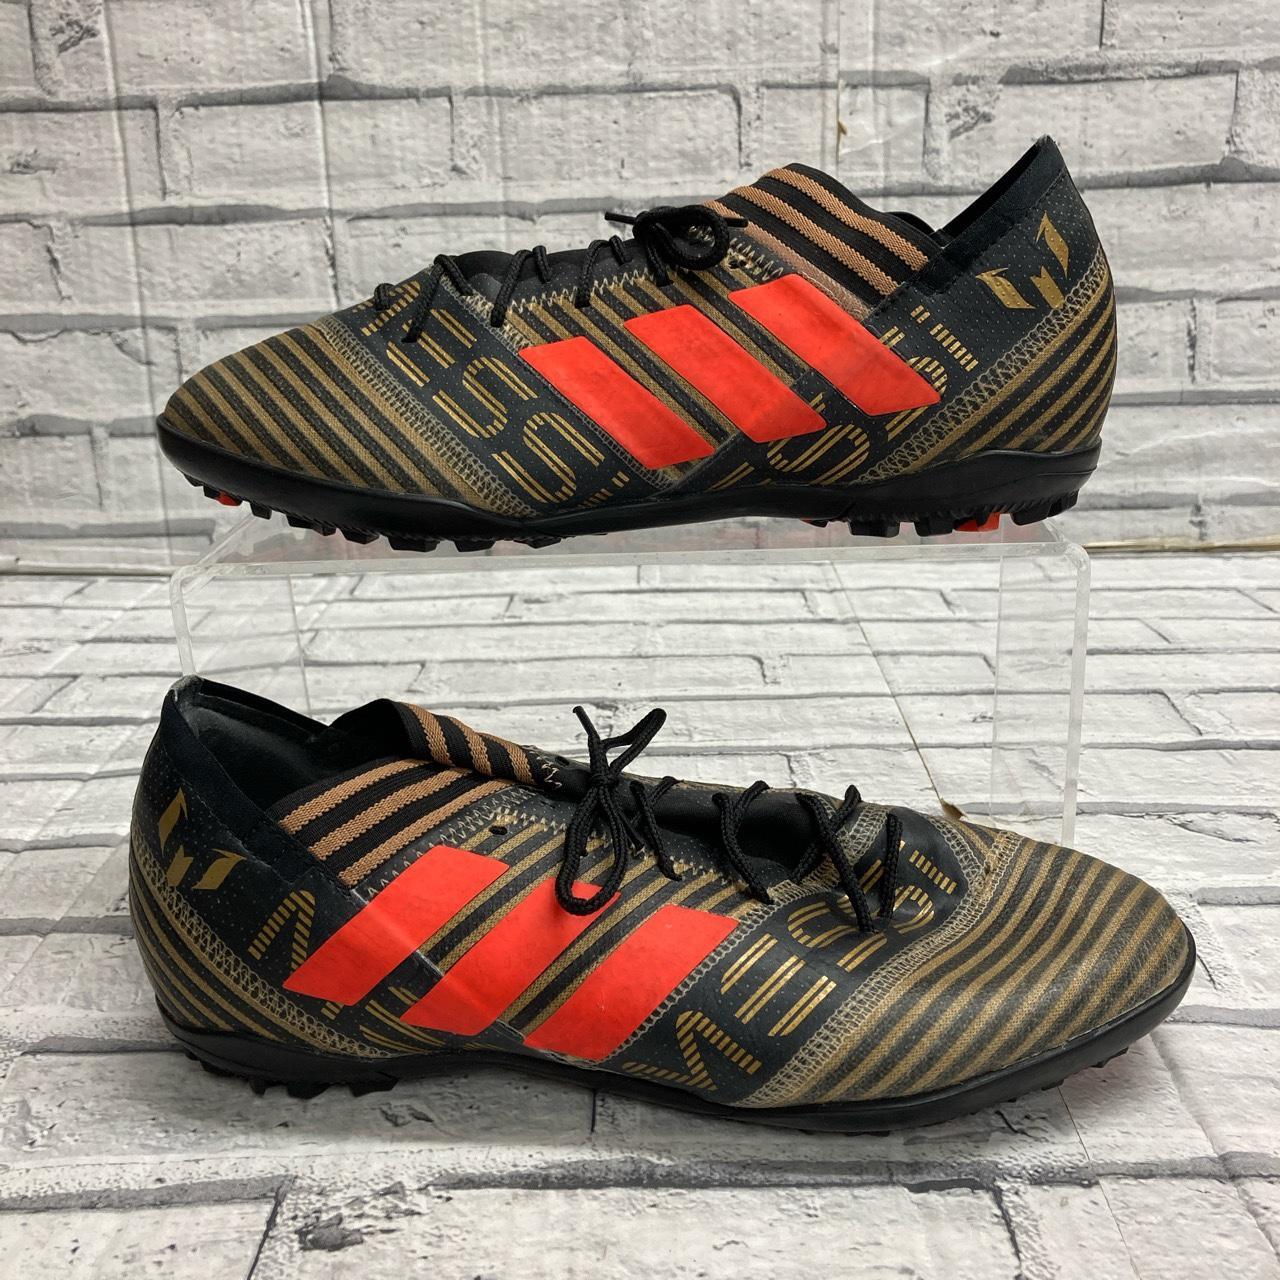 Adidas Men's Black and Gold Boots | Depop